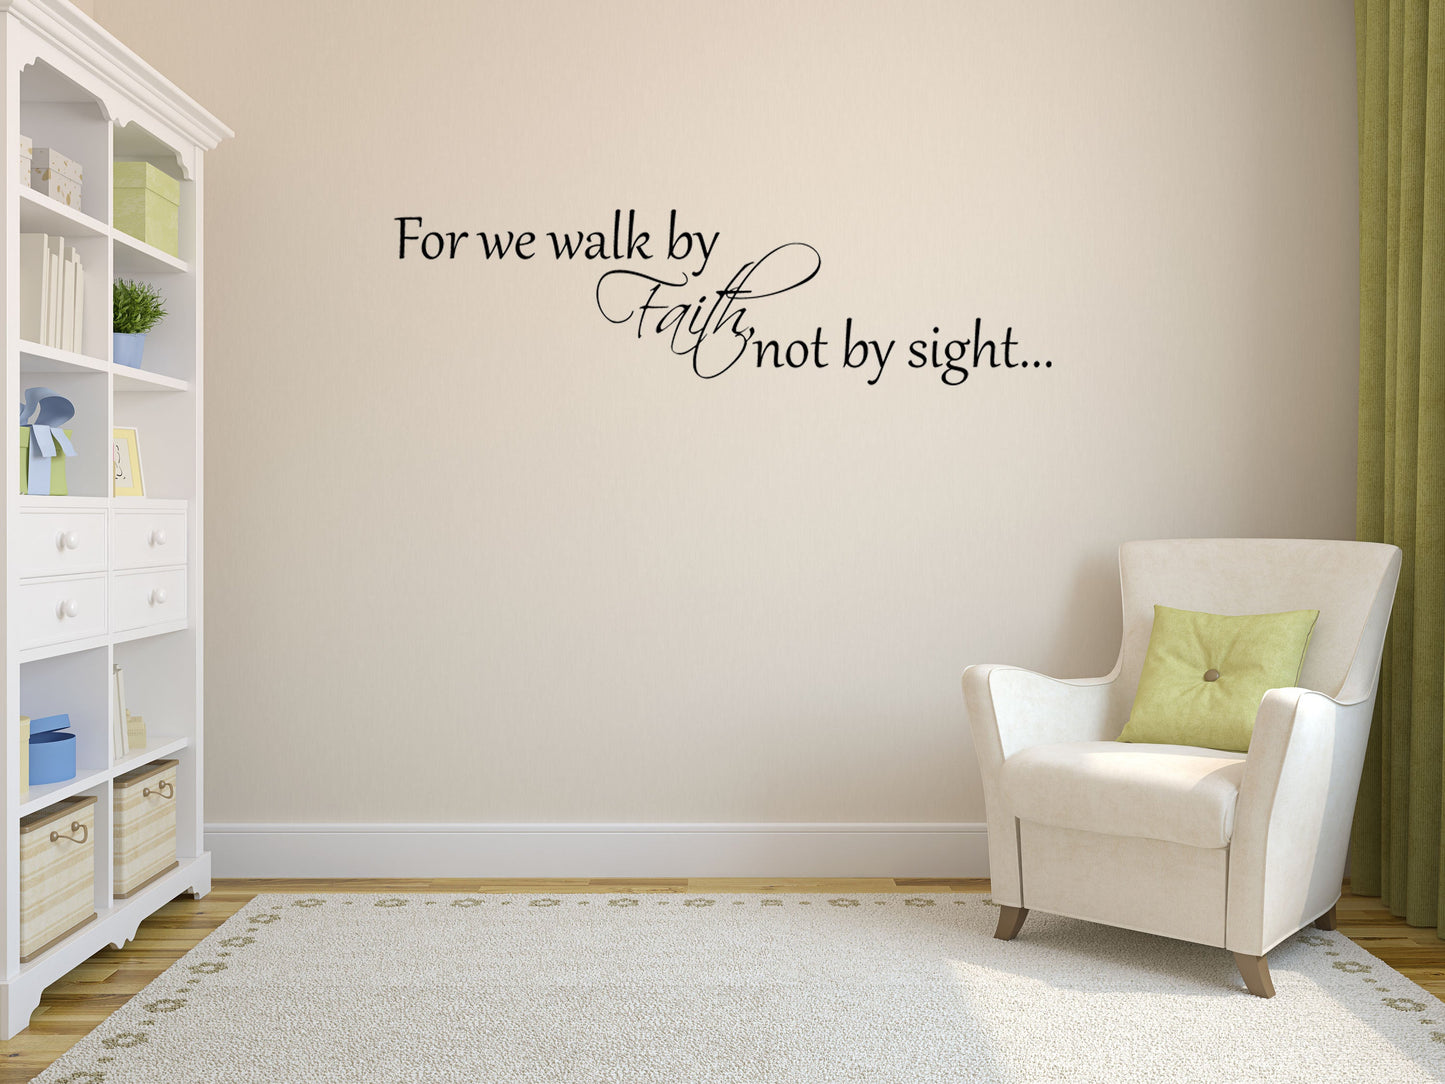 For We Walk By Faith Not By Sight - Inspirational Wall Decals Vinyl Wall Decal Inspirational Wall Signs 